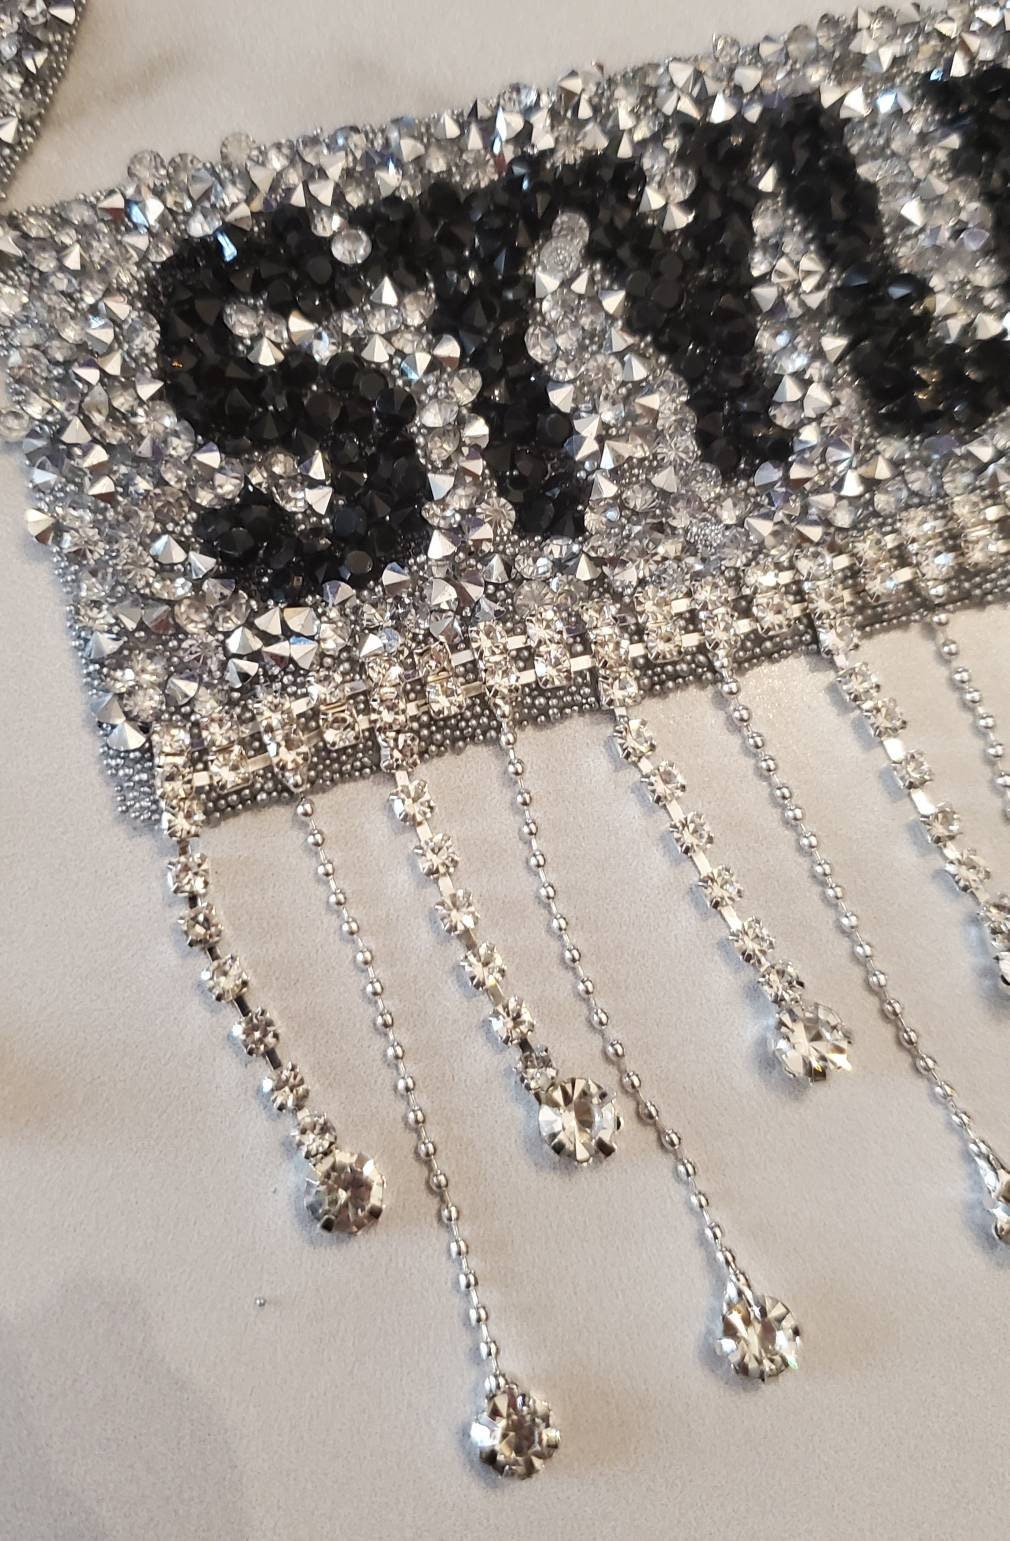 New Arrival, "STYLE" Blinged Out, Dripping Rhinestone Patch with Adhesive, Rhinestone Applique, Size 4"x4", Czech Rhinestones, DIY Applique